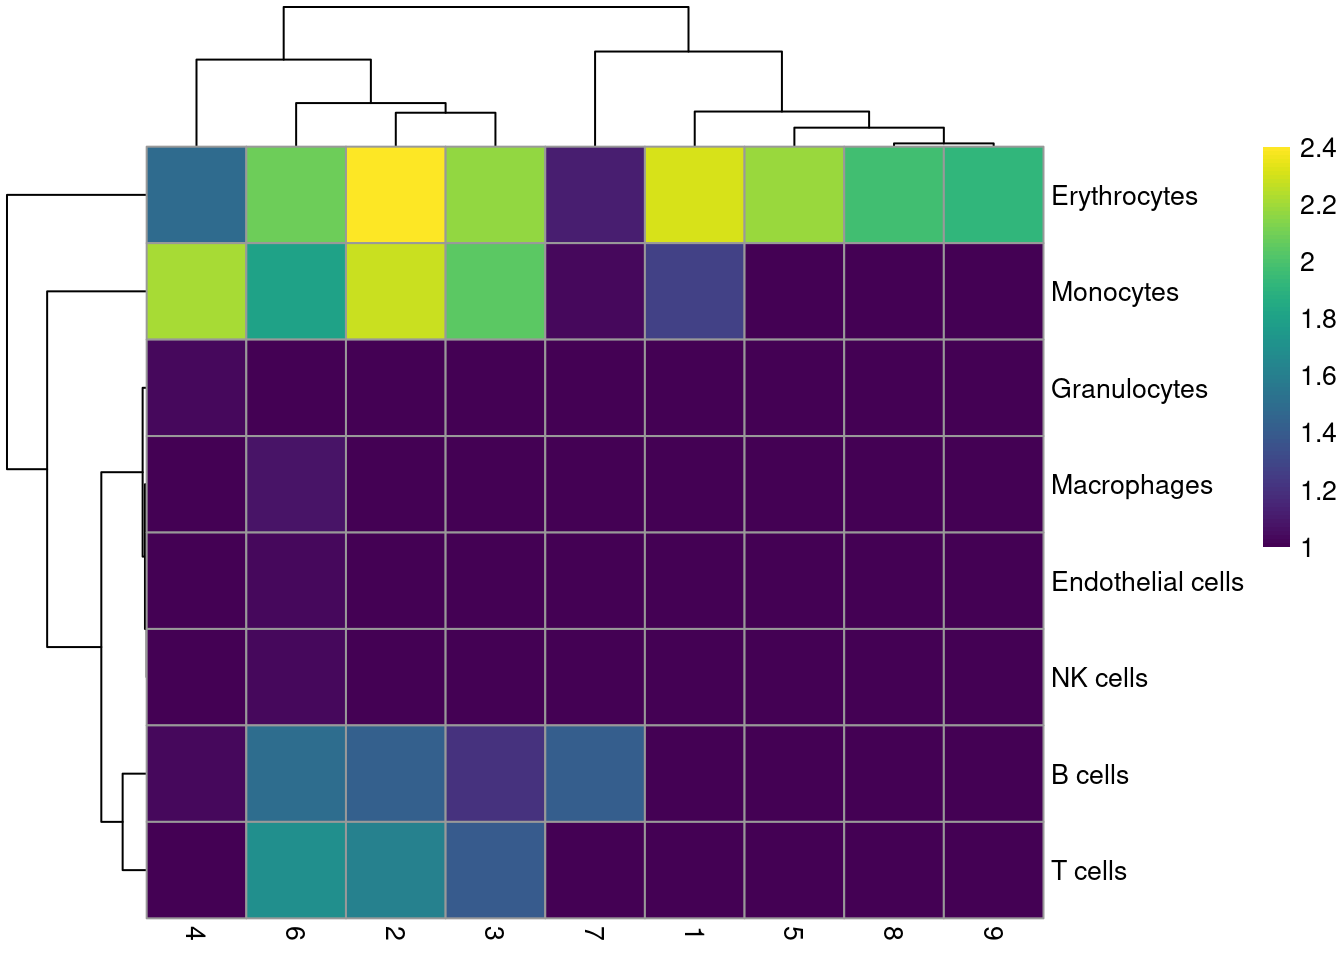 Heatmap of the distribution of cells for each cluster in the Nestorowa HSC dataset, based on their assignment to each label in the mouse RNA-seq references from the _SingleR_ package.